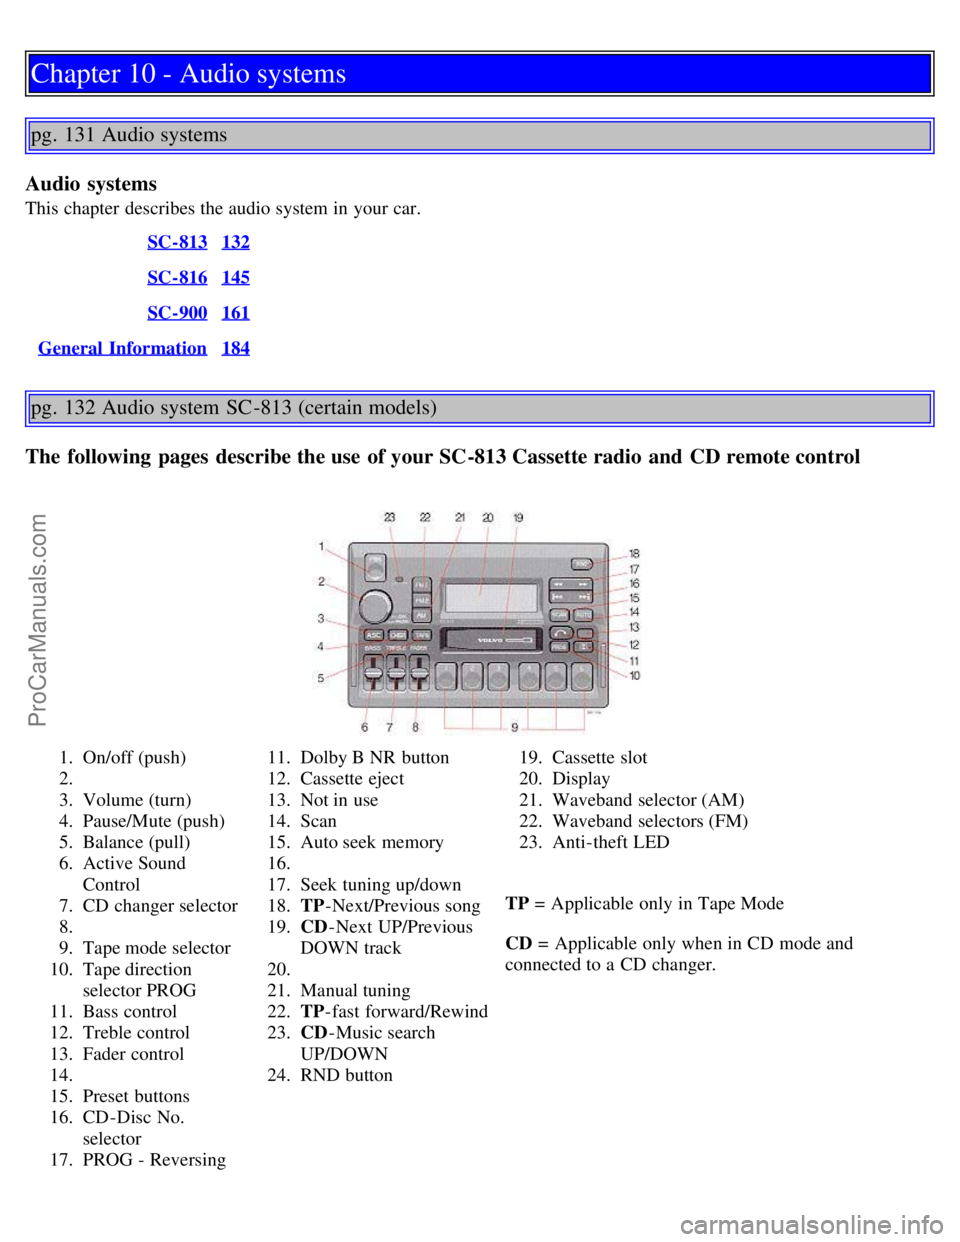 VOLVO C70 1998  Owners Manual Chapter 10 - Audio systems
pg. 131 Audio systems
Audio  systems
This chapter  describes the audio system in your car. SC-813
132
SC-816145
SC-900161
General  Information184
pg. 132 Audio system  SC -8